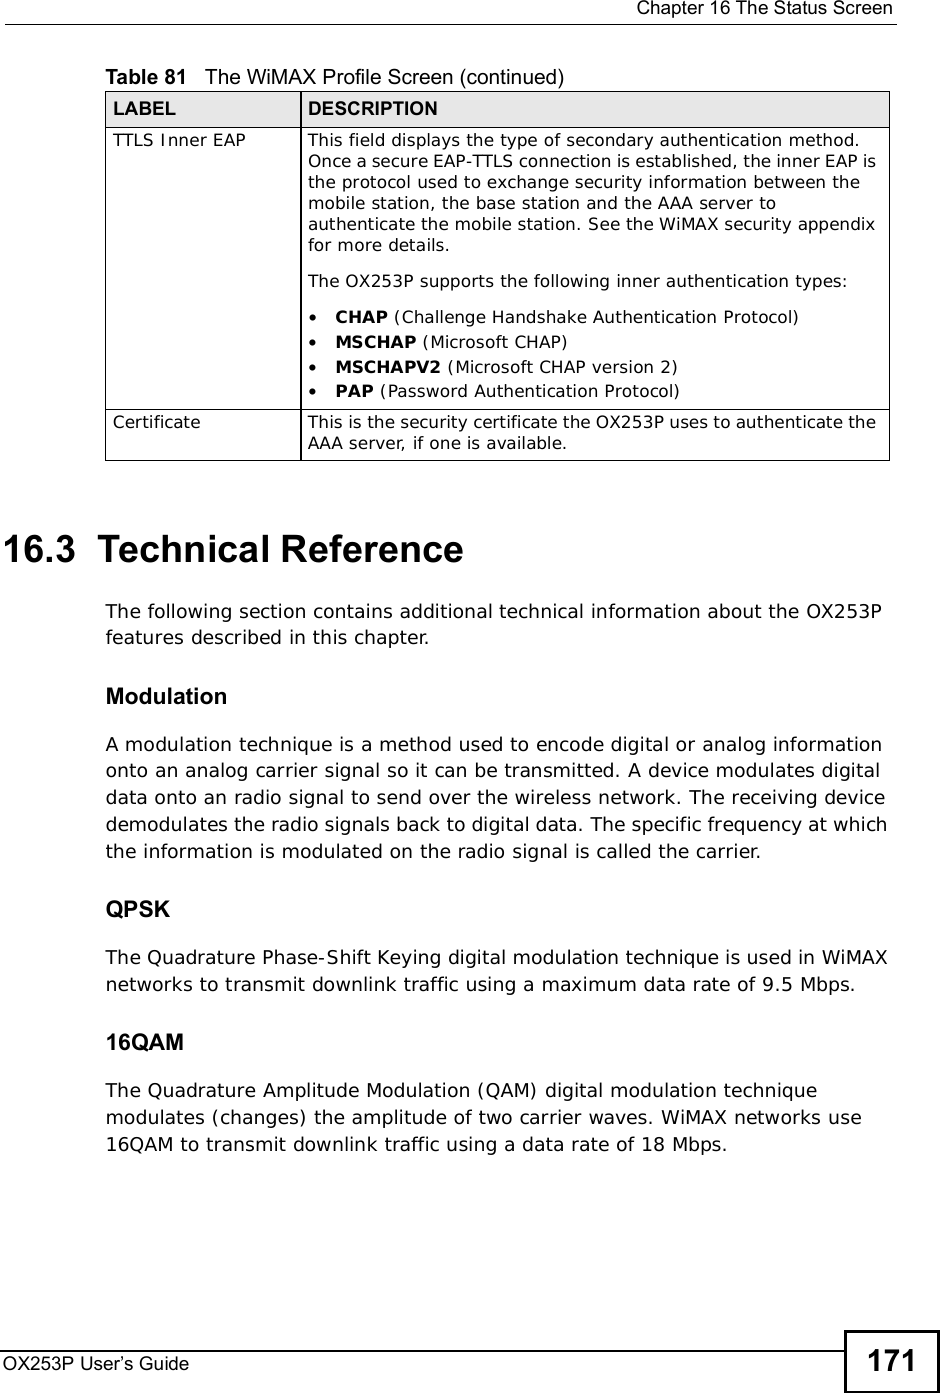  Chapter 16The Status ScreenOX253P User’s Guide 17116.3  Technical ReferenceThe following section contains additional technical information about the OX253P features described in this chapter.ModulationA modulation technique is a method used to encode digital or analog information onto an analog carrier signal so it can be transmitted. A device modulates digital data onto an radio signal to send over the wireless network. The receiving device demodulates the radio signals back to digital data. The specific frequency at which the information is modulated on the radio signal is called the carrier.QPSKThe Quadrature Phase-Shift Keying digital modulation technique is used in WiMAX networks to transmit downlink traffic using a maximum data rate of 9.5 Mbps.16QAMThe Quadrature Amplitude Modulation (QAM) digital modulation technique modulates (changes) the amplitude of two carrier waves. WiMAX networks use 16QAM to transmit downlink traffic using a data rate of 18 Mbps.TTLS Inner EAPThis field displays the type of secondary authentication method. Once a secure EAP-TTLS connection is established, the inner EAP is the protocol used to exchange security information between the mobile station, the base station and the AAA server to authenticate the mobile station. See the WiMAX security appendix for more details.The OX253P supports the following inner authentication types:•CHAP (Challenge Handshake Authentication Protocol)•MSCHAP (Microsoft CHAP)•MSCHAPV2 (Microsoft CHAP version 2)•PAP (Password Authentication Protocol)CertificateThis is the security certificate the OX253P uses to authenticate the AAA server, if one is available.Table 81   The WiMAX Profile Screen (continued)LABEL DESCRIPTION